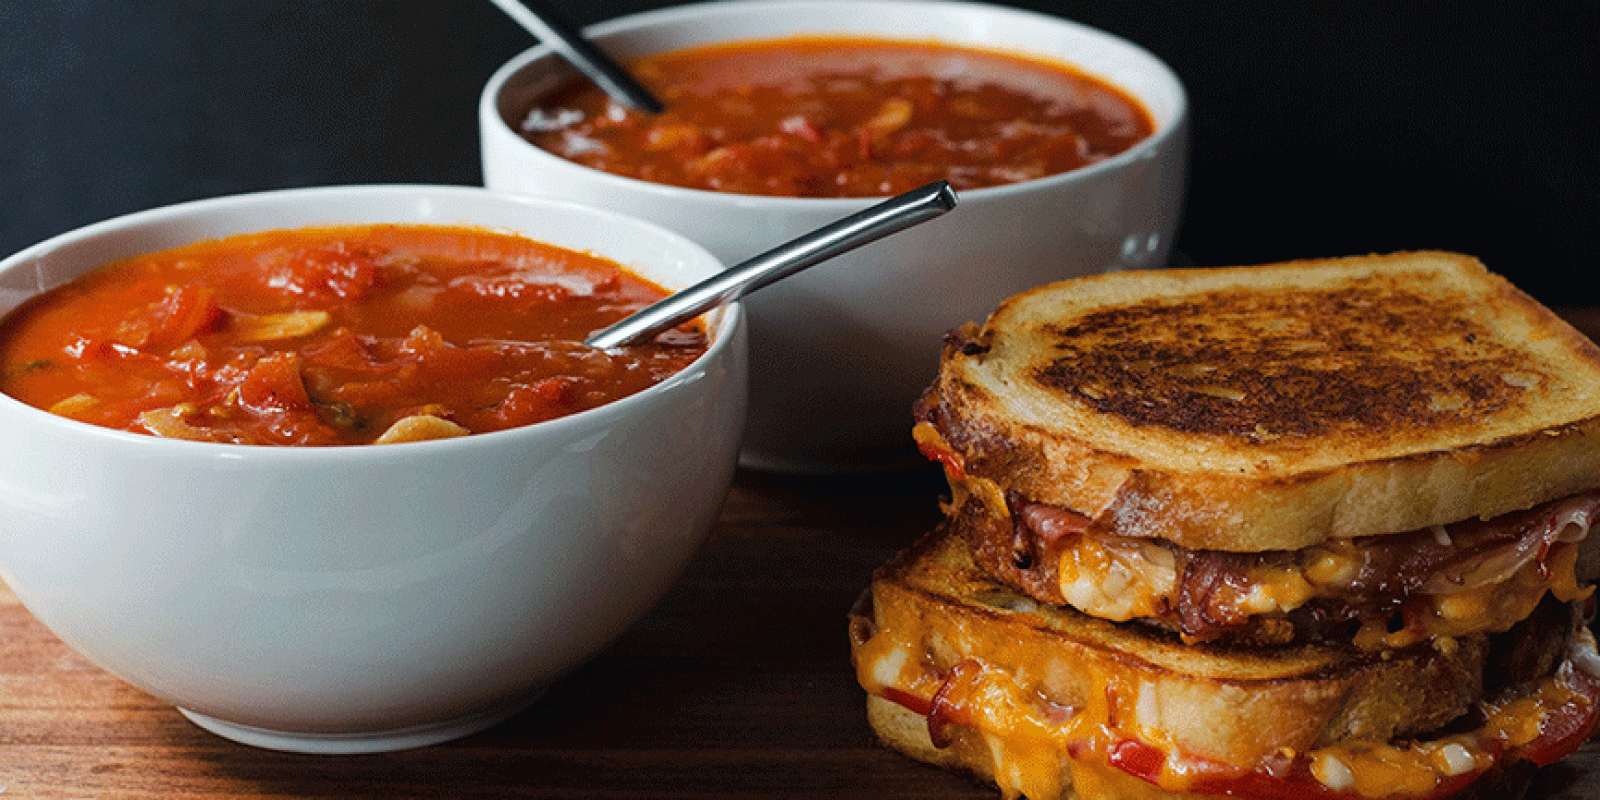 https://andrewzimmern.com/wp-content/uploads/Tomato-Soup-with-Cheese-Toastie-1600x800.gif